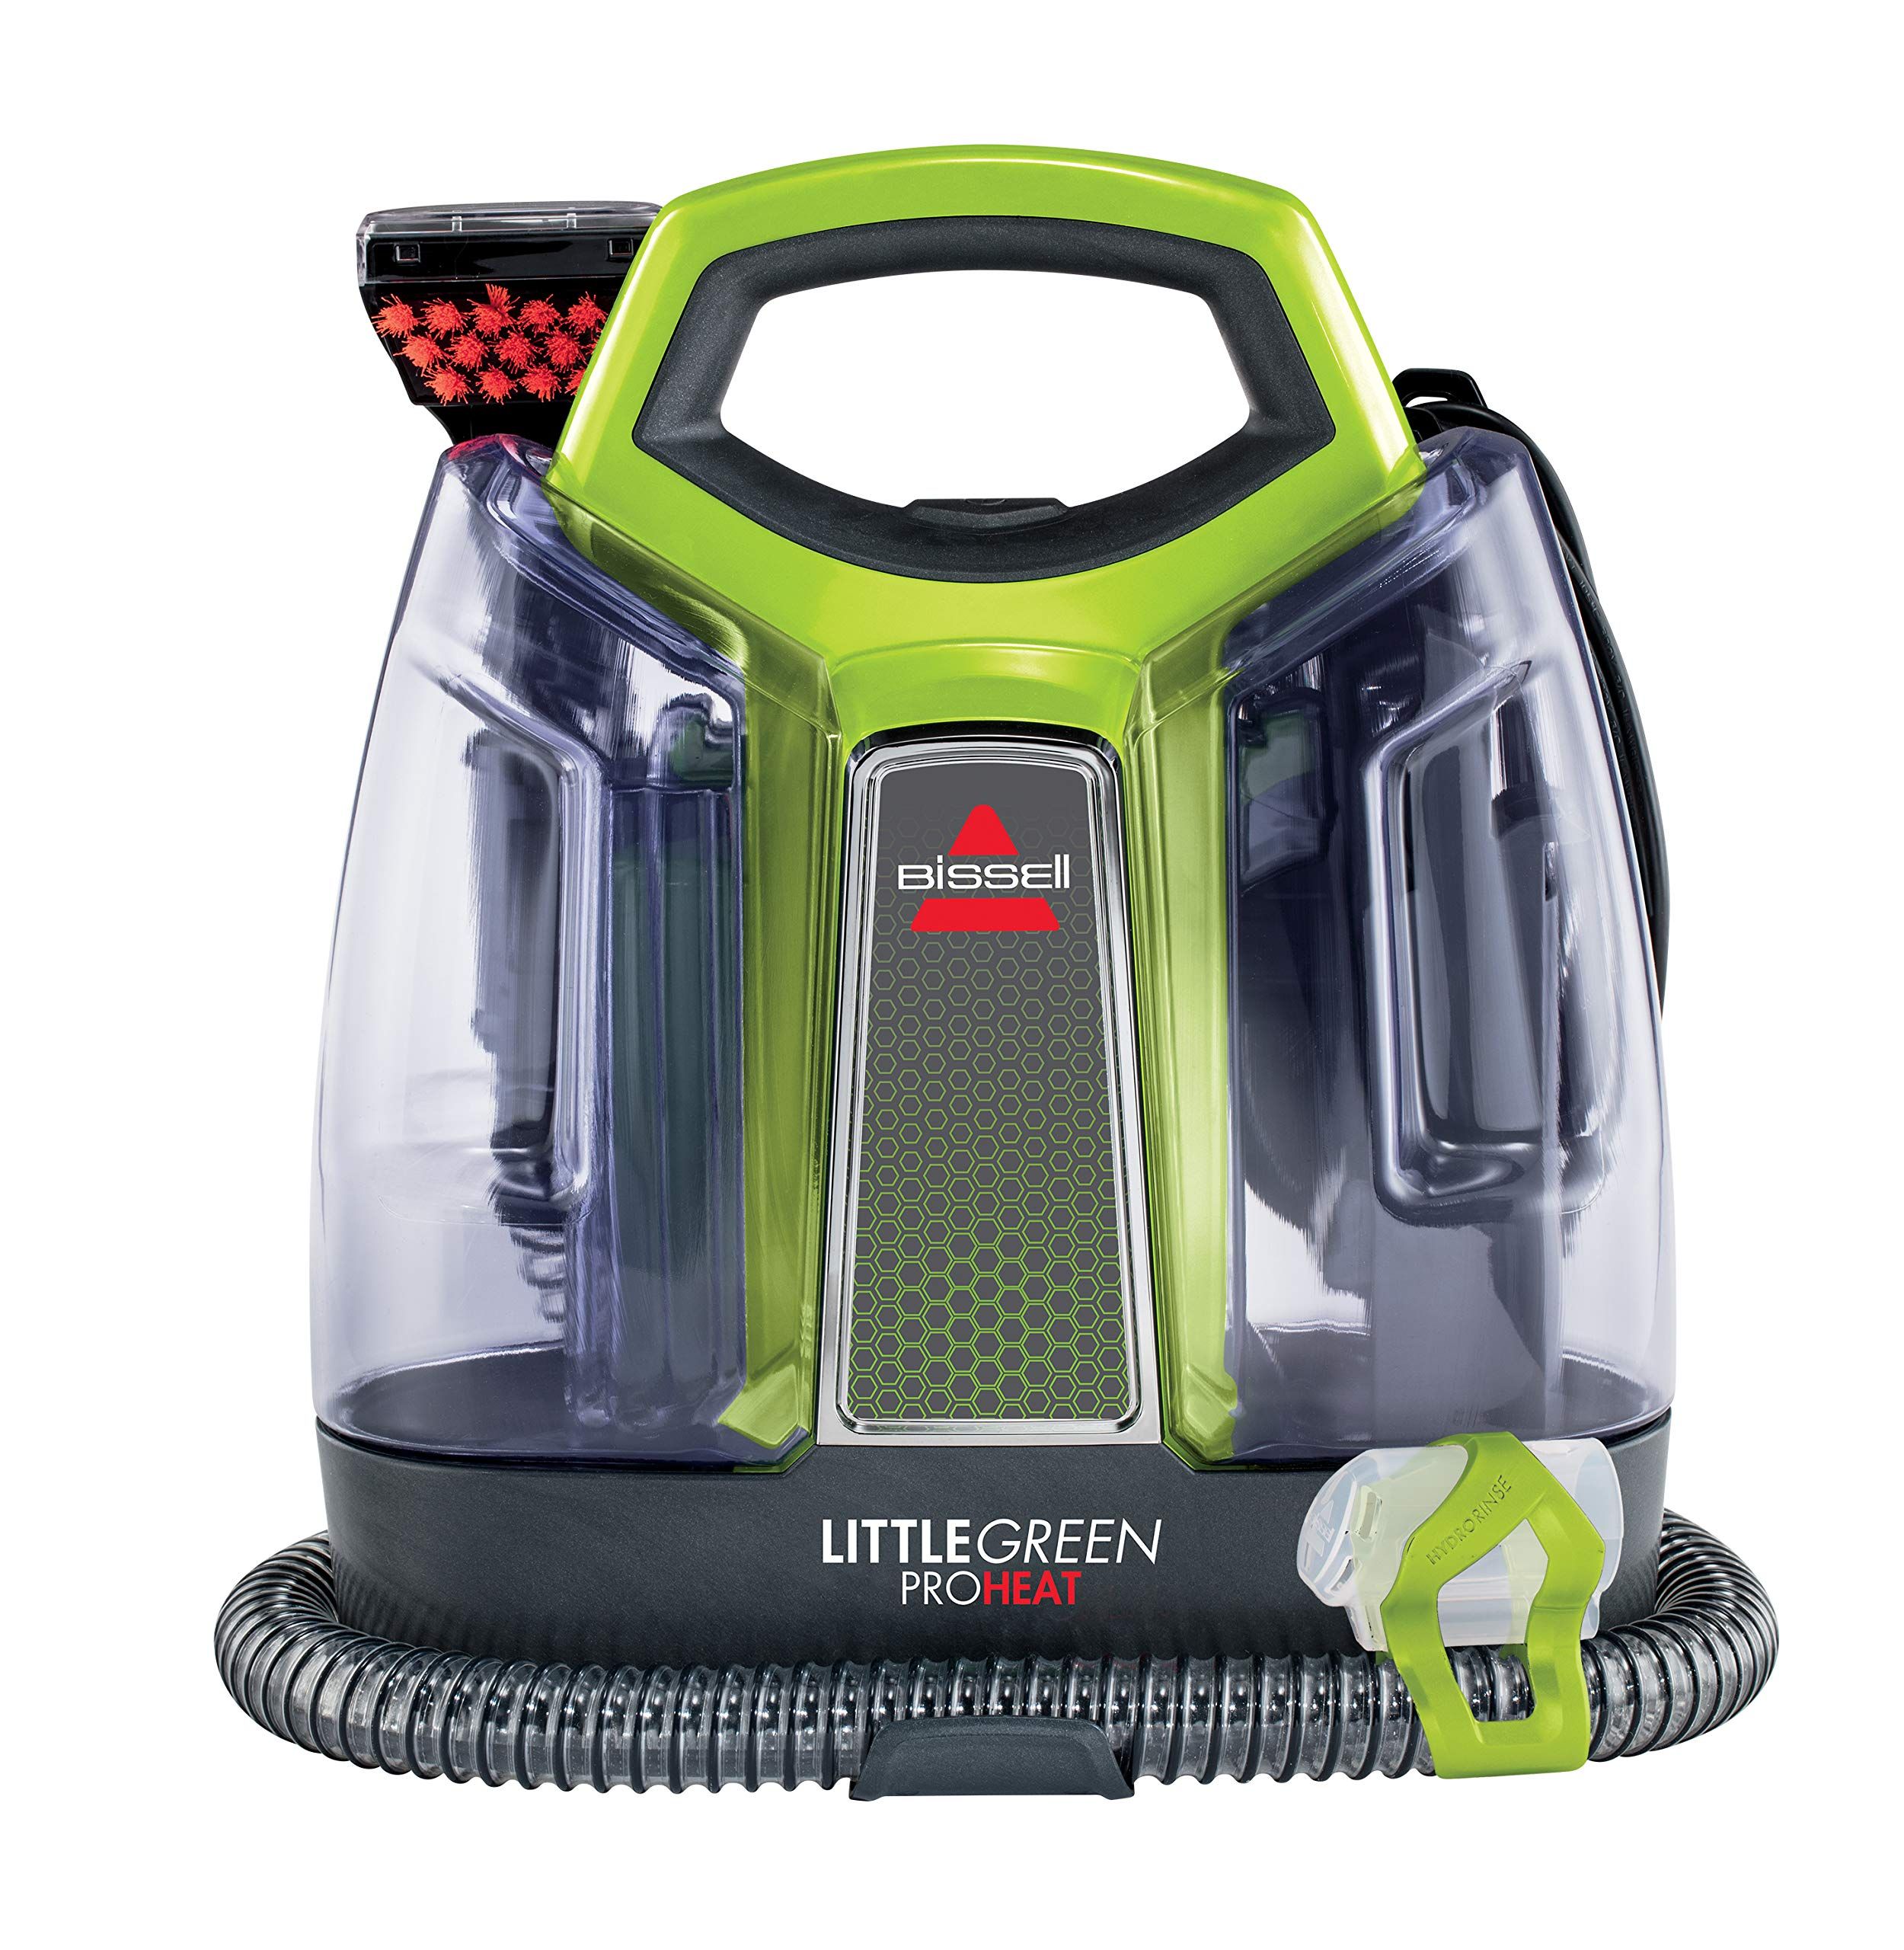 Bissell Little Green ProHeat Pet Full-Size Floor Cleaning Appliances | Amazon (US)